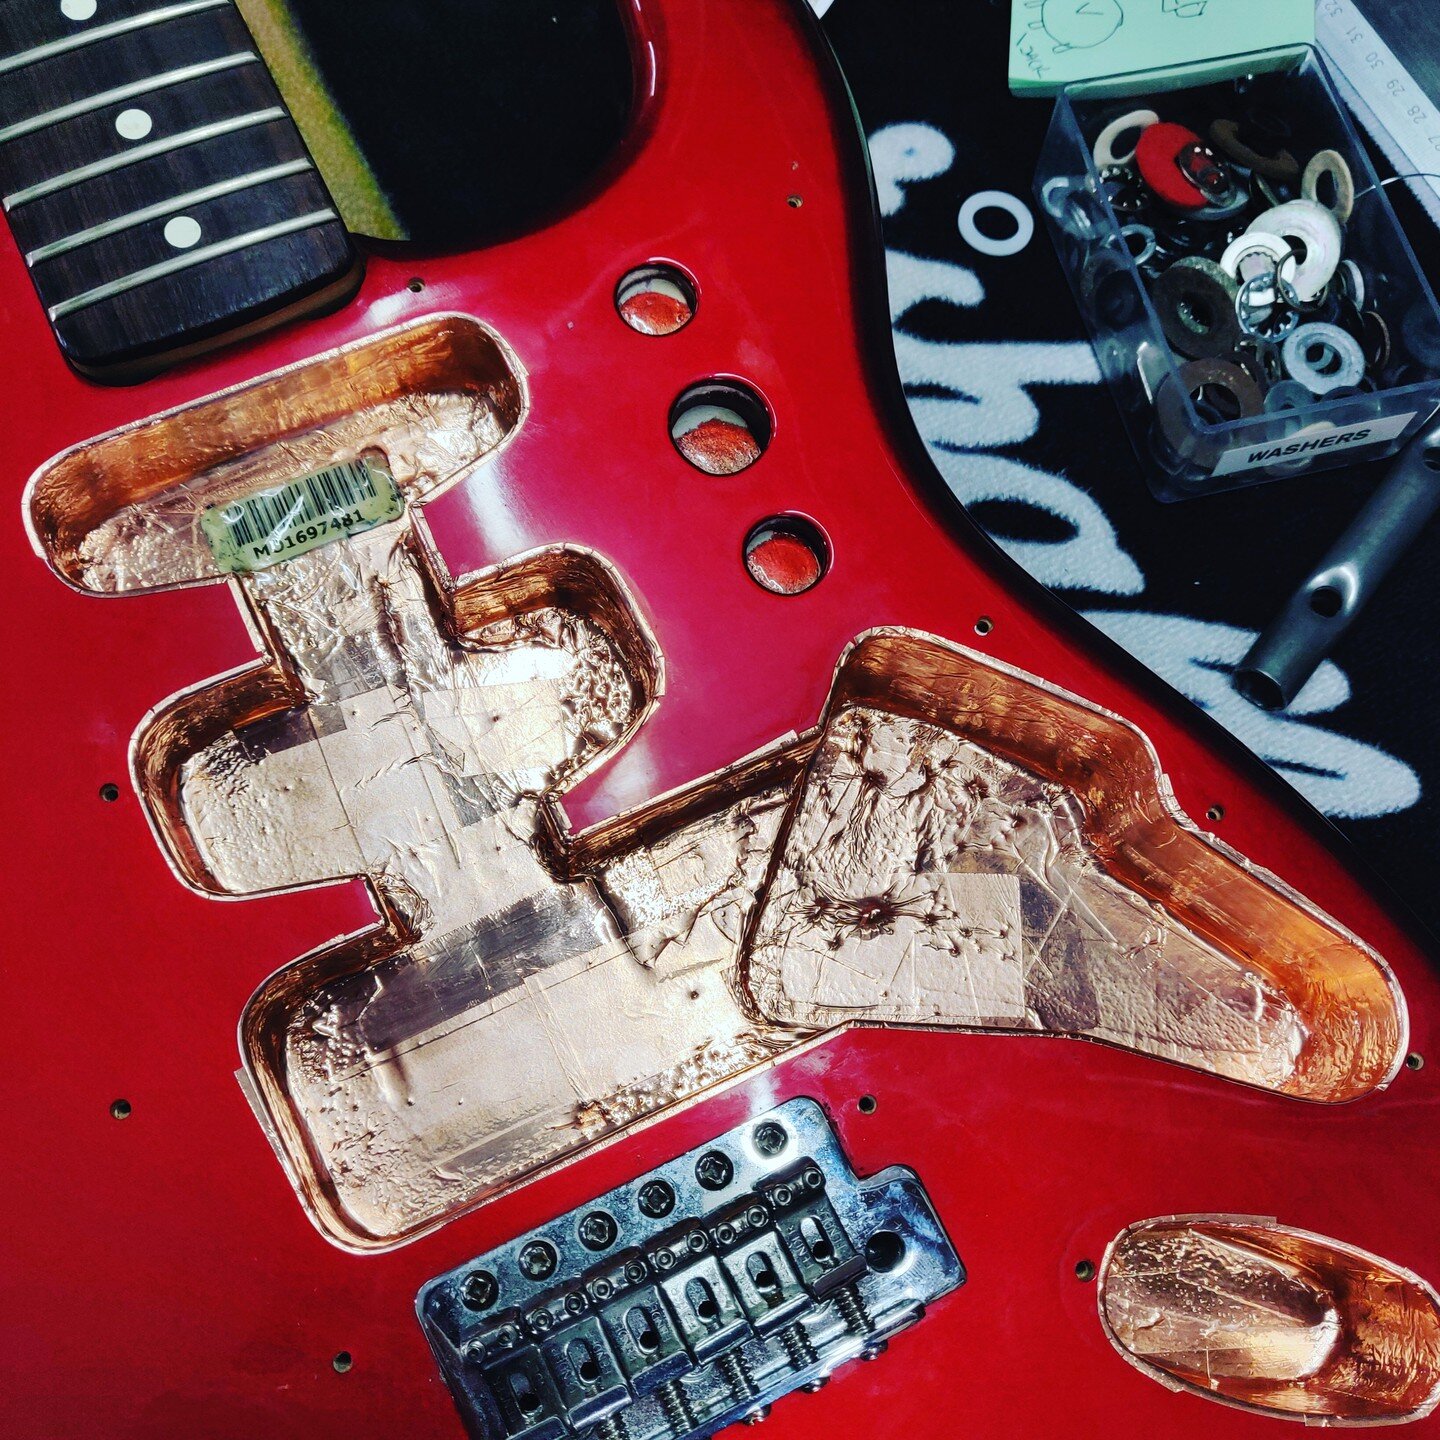 A Red Fender Stratocaster shielded and wiring neatened up for @jaredpitt_isomusic. Runs much quieter now 🤫
.
👈 After (Shielded)
👉 Before (Unshielded)
.
👈 After (Neatened)
👉 Before (Standard)
.
.
.
.
.
.
#weztech #guitarservicing #guitartech #gui